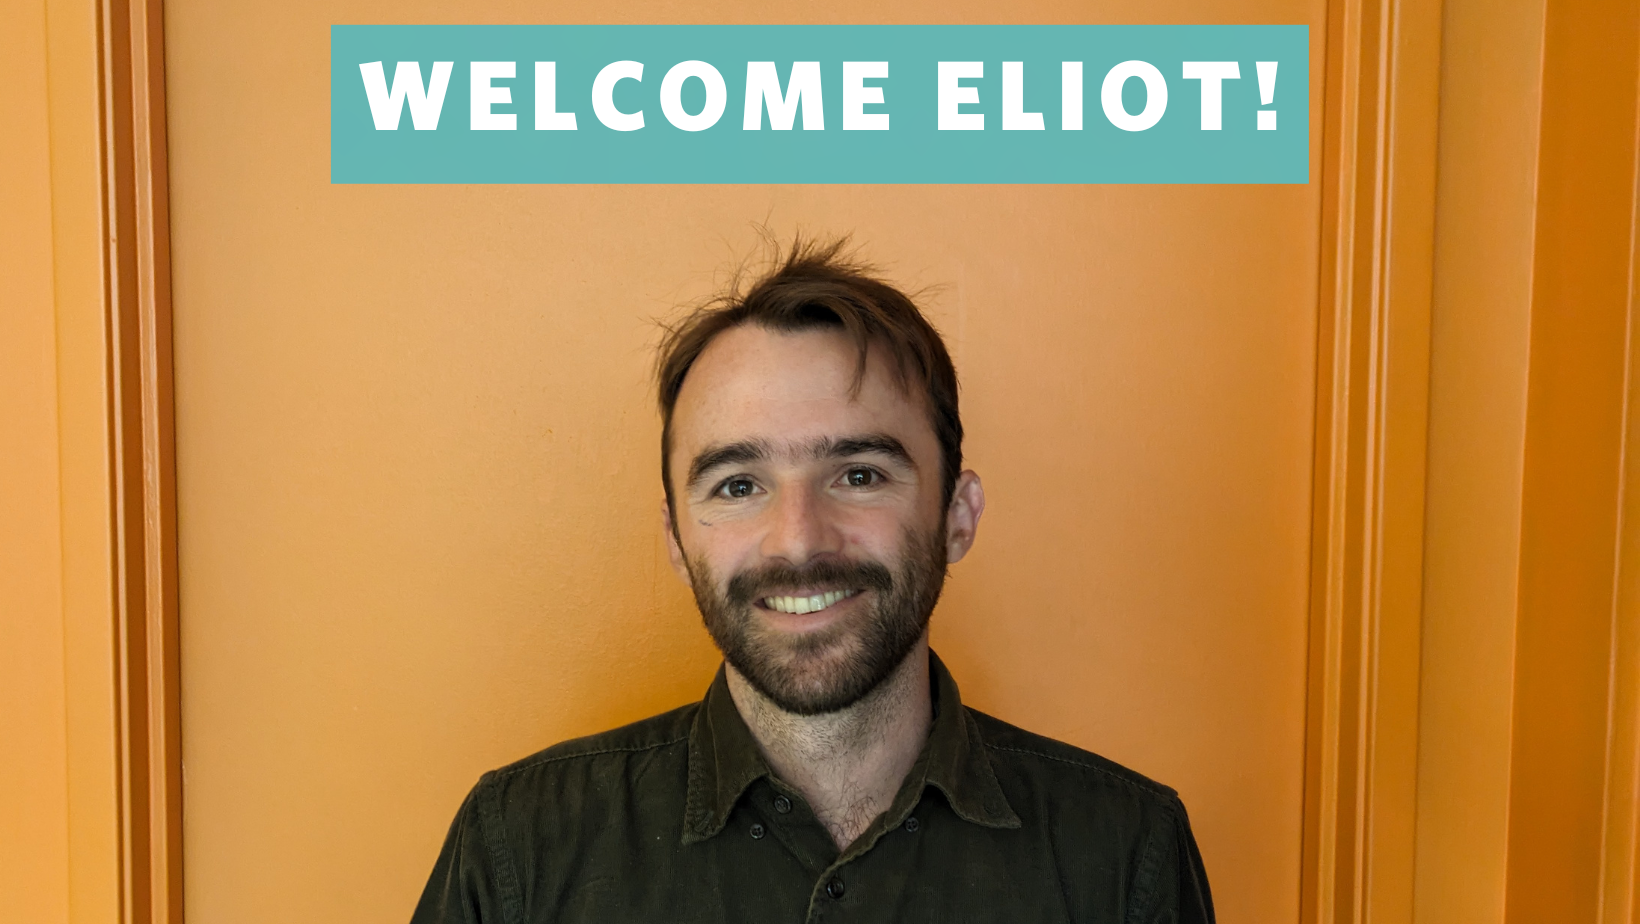 Join us in welcoming Eliot to our team!